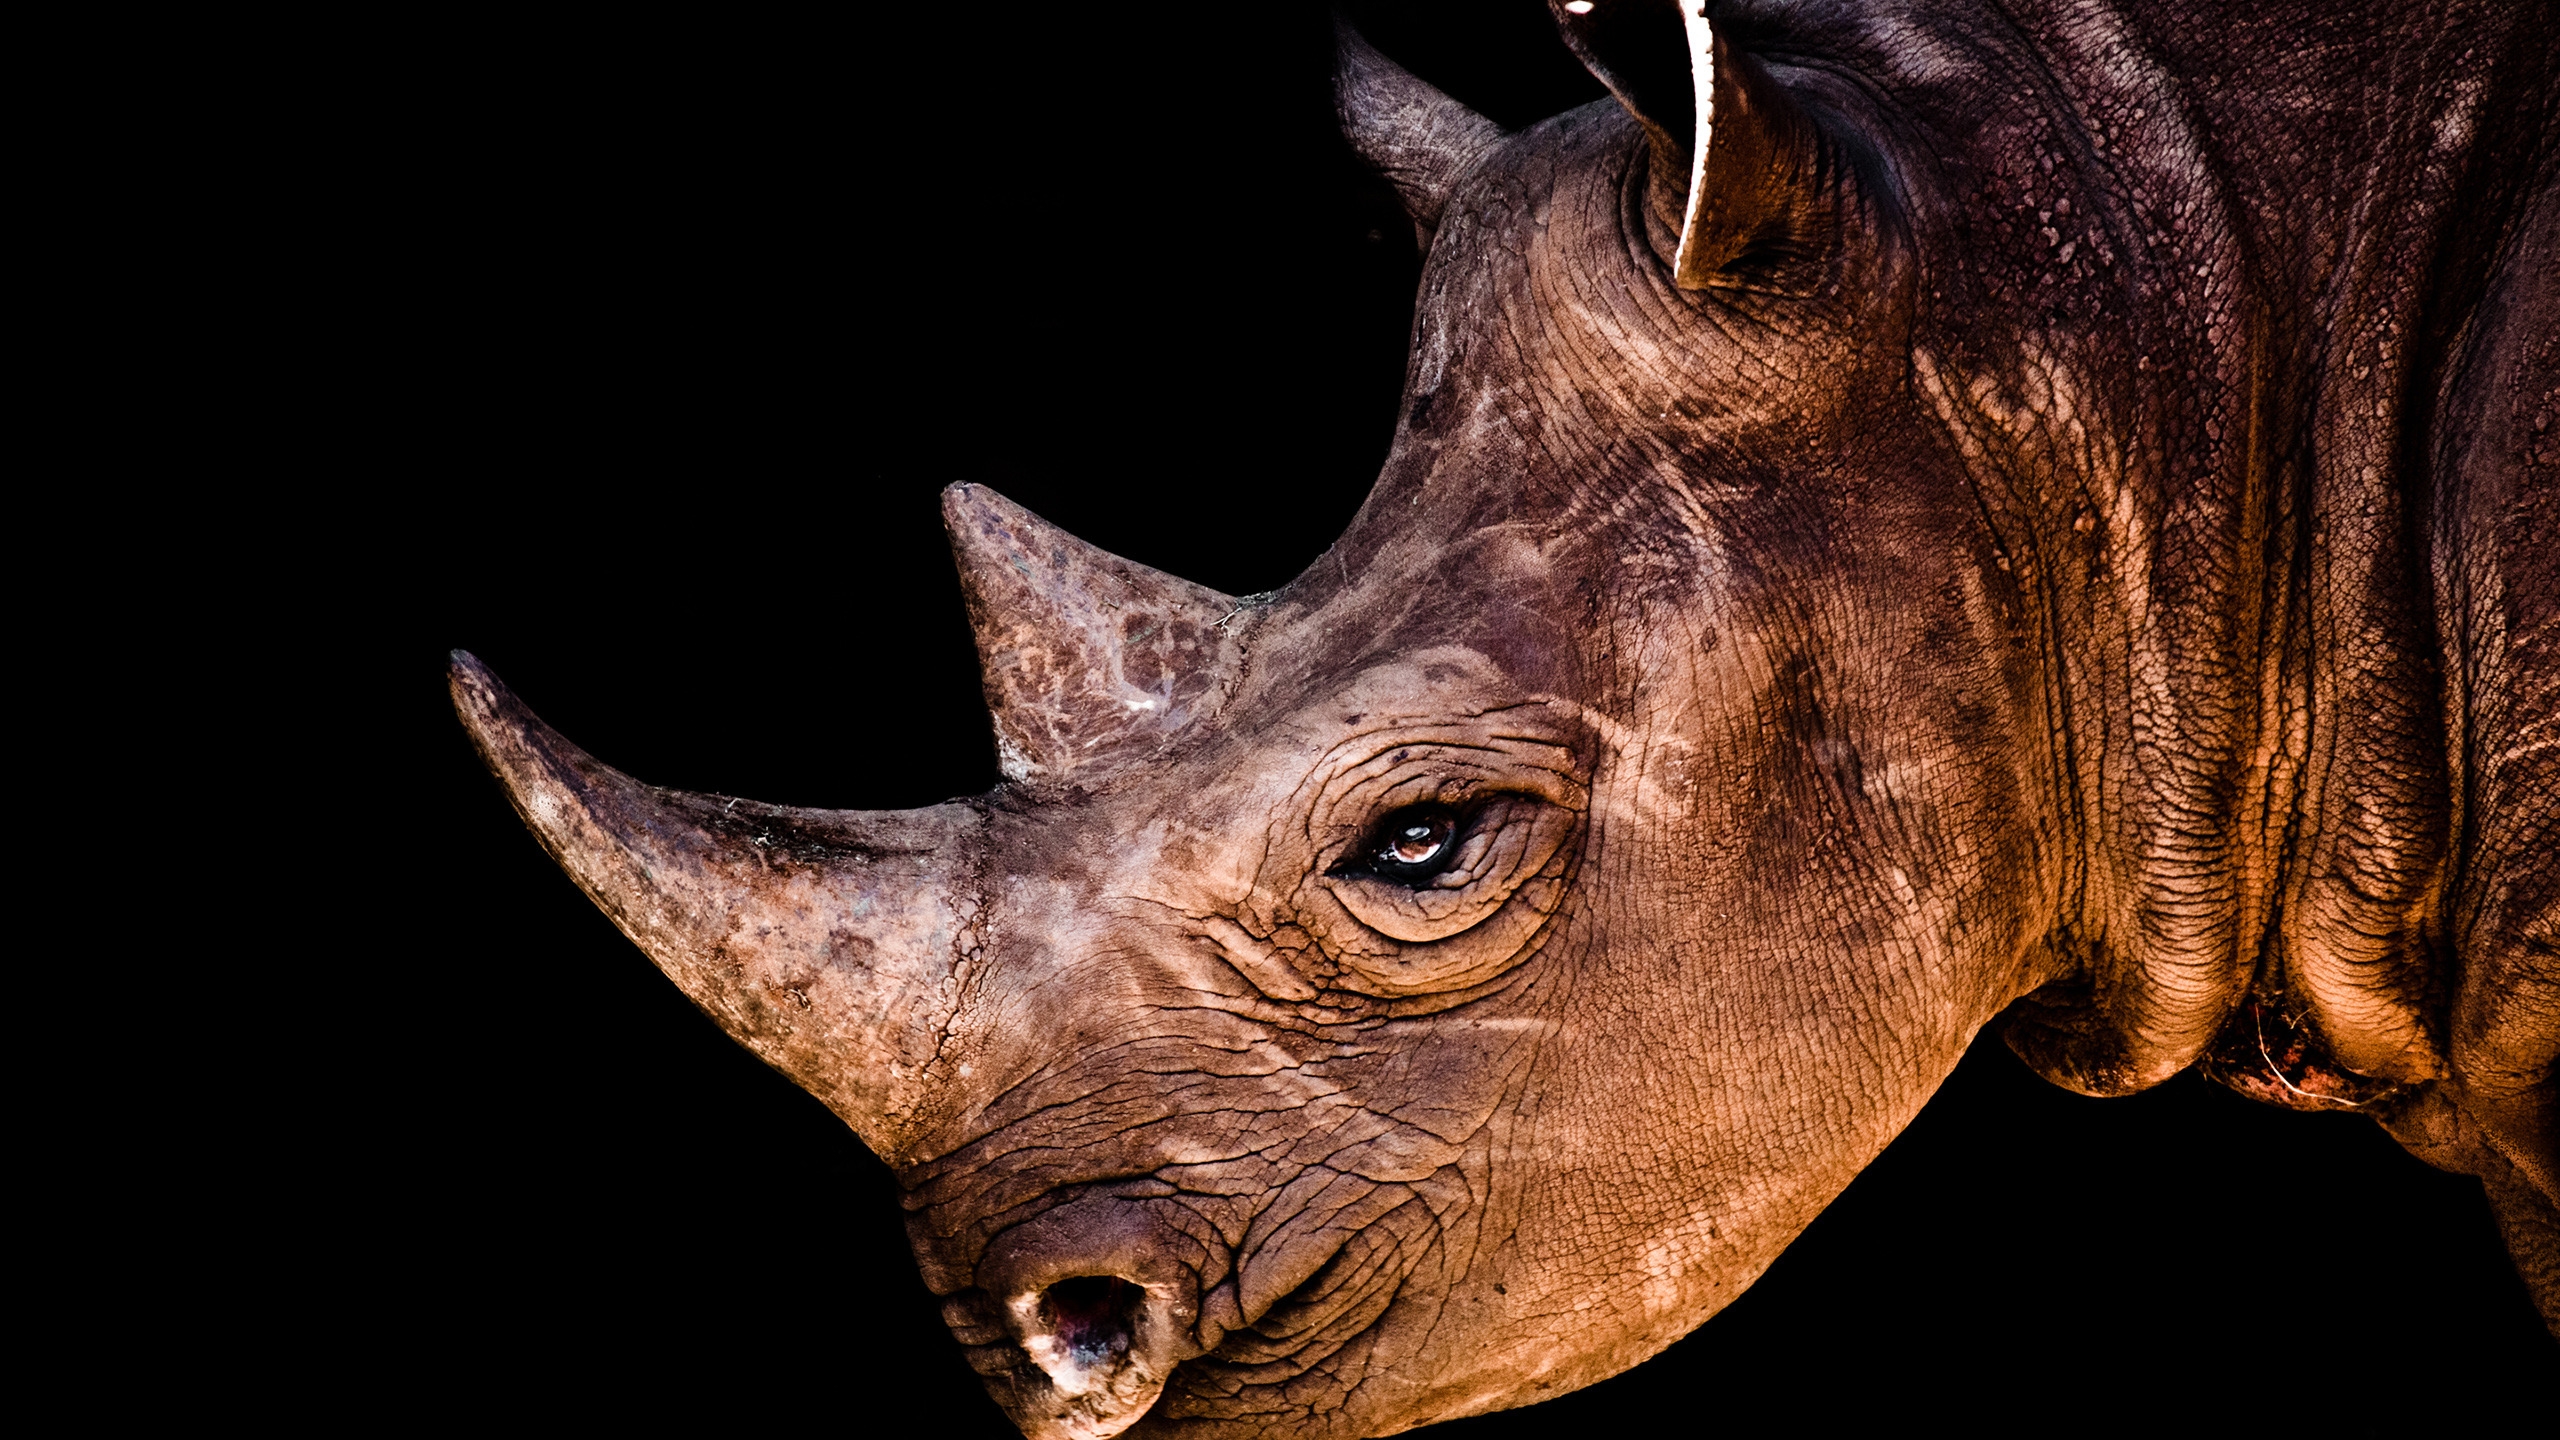 Rhino Face for 2560x1440 HDTV resolution